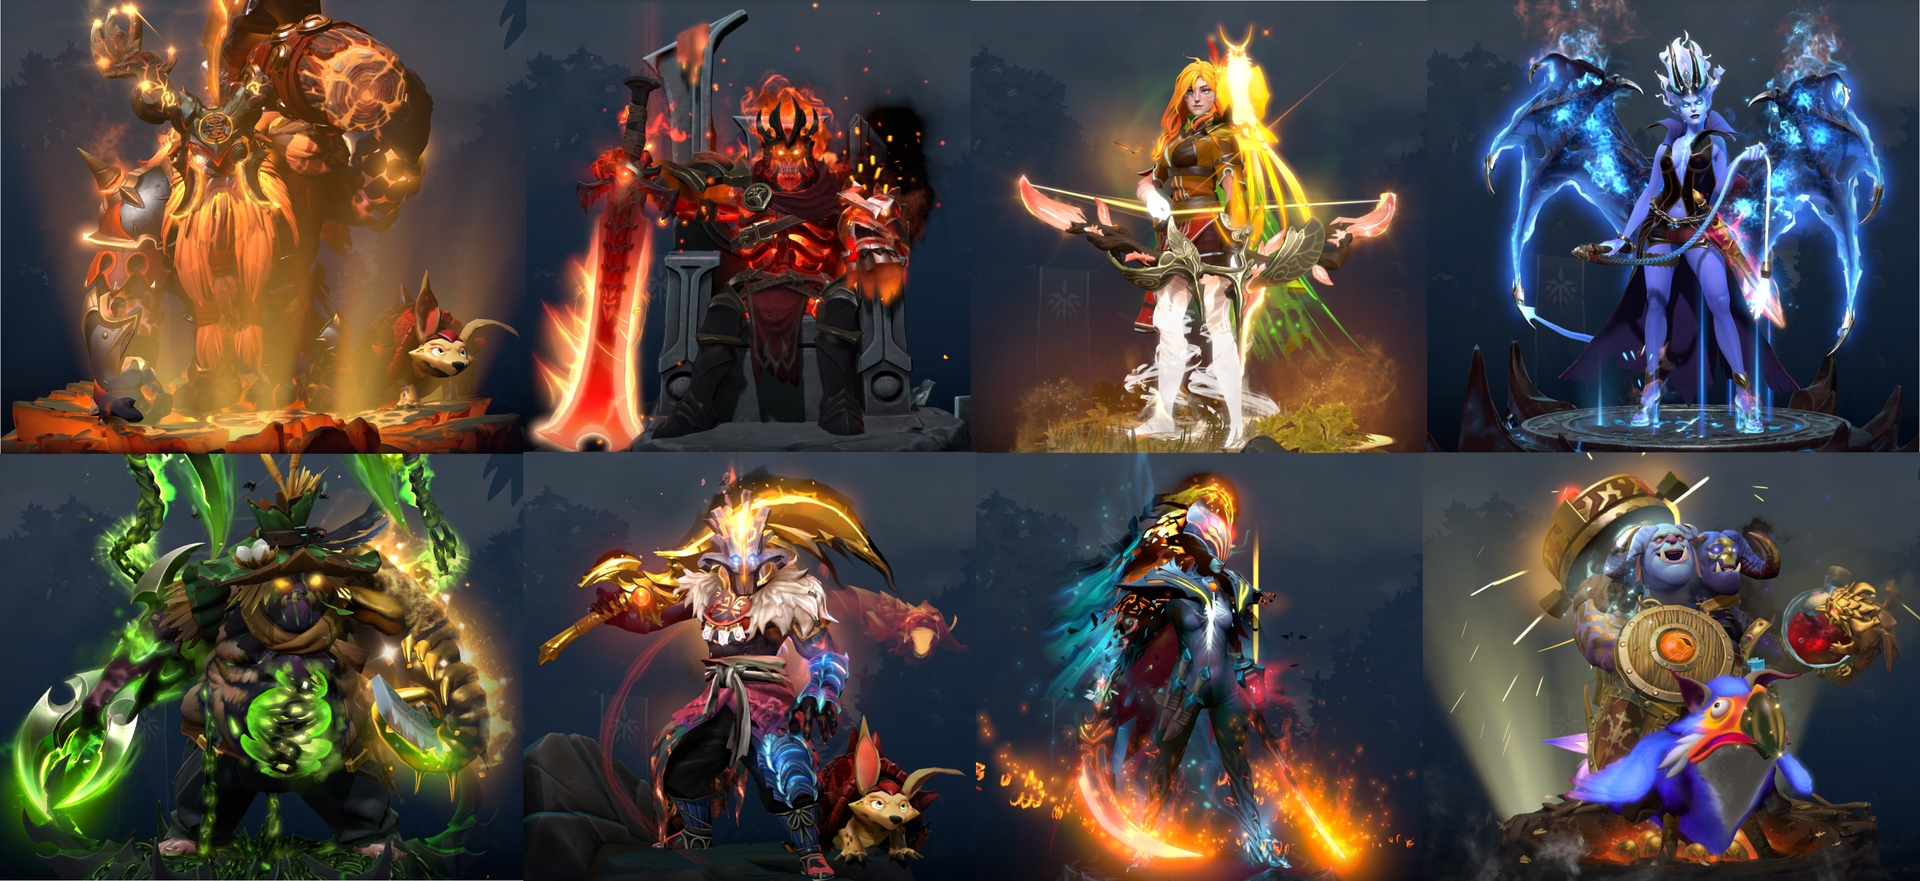 In this article, we are going to be covering how to get free arcana in Dota 2, so you can get your hands on the freebie that Valve is offering to fans as an apology.